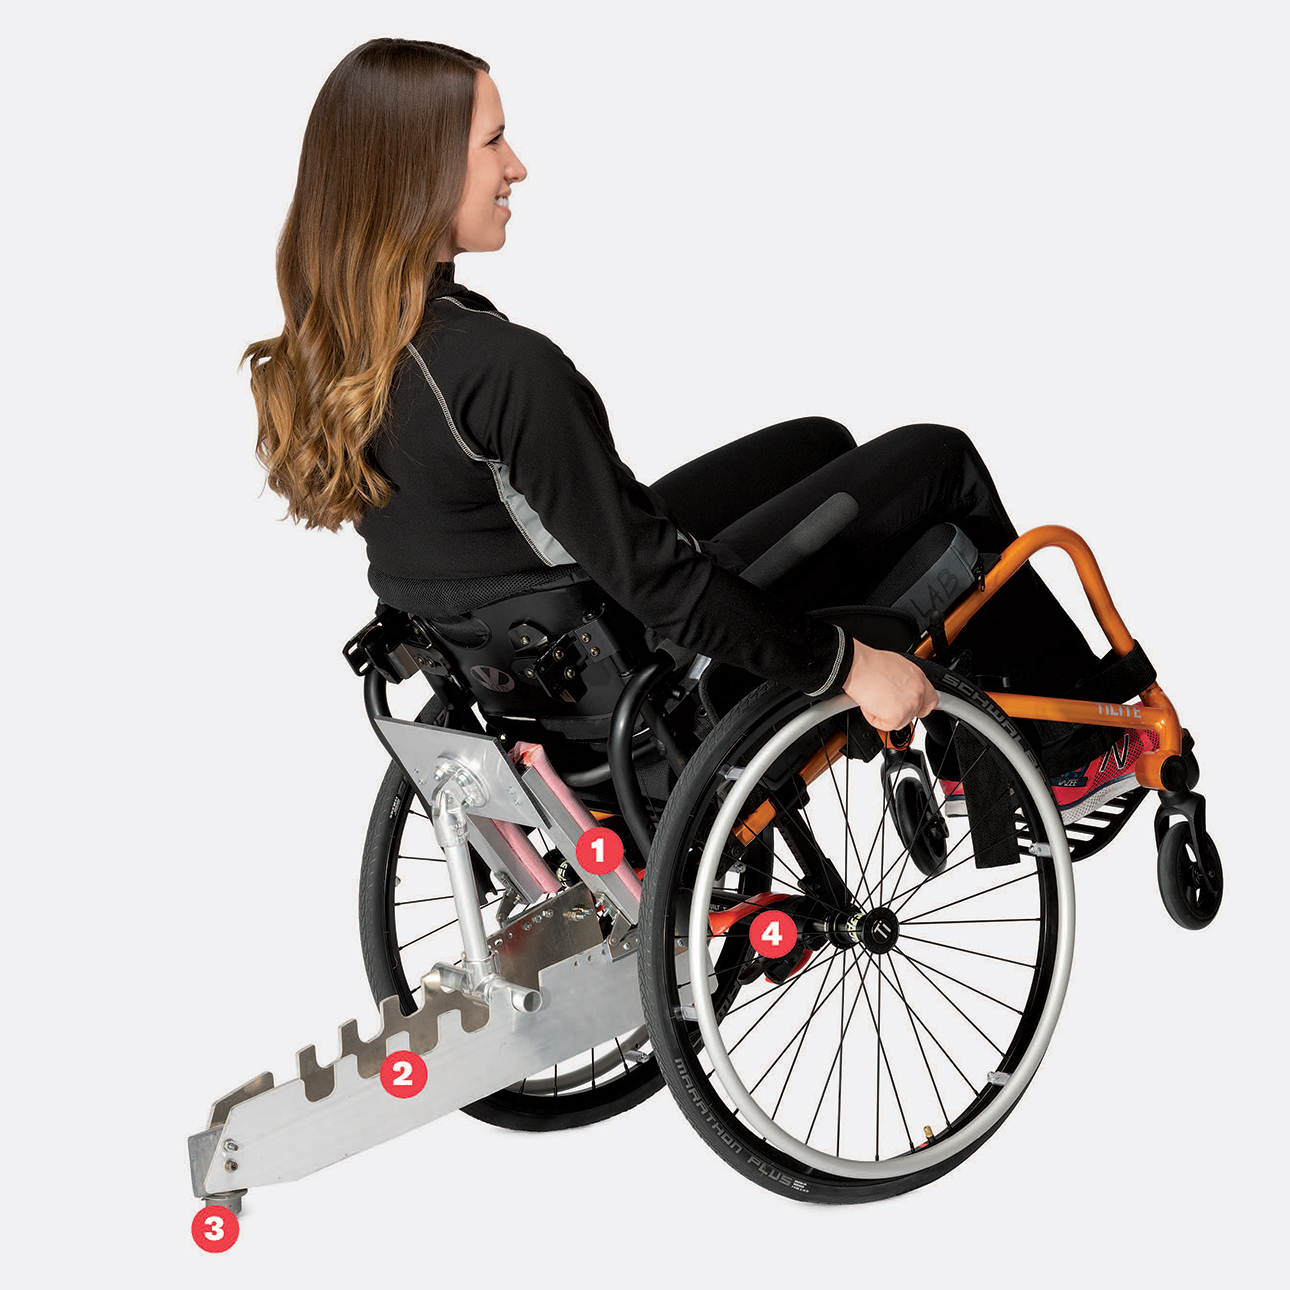 Lindsey Yingling, a physical therapist and wheelchair seating expert for Shirley Ryan AbilityLab, demonstrates the Alligator Tail.